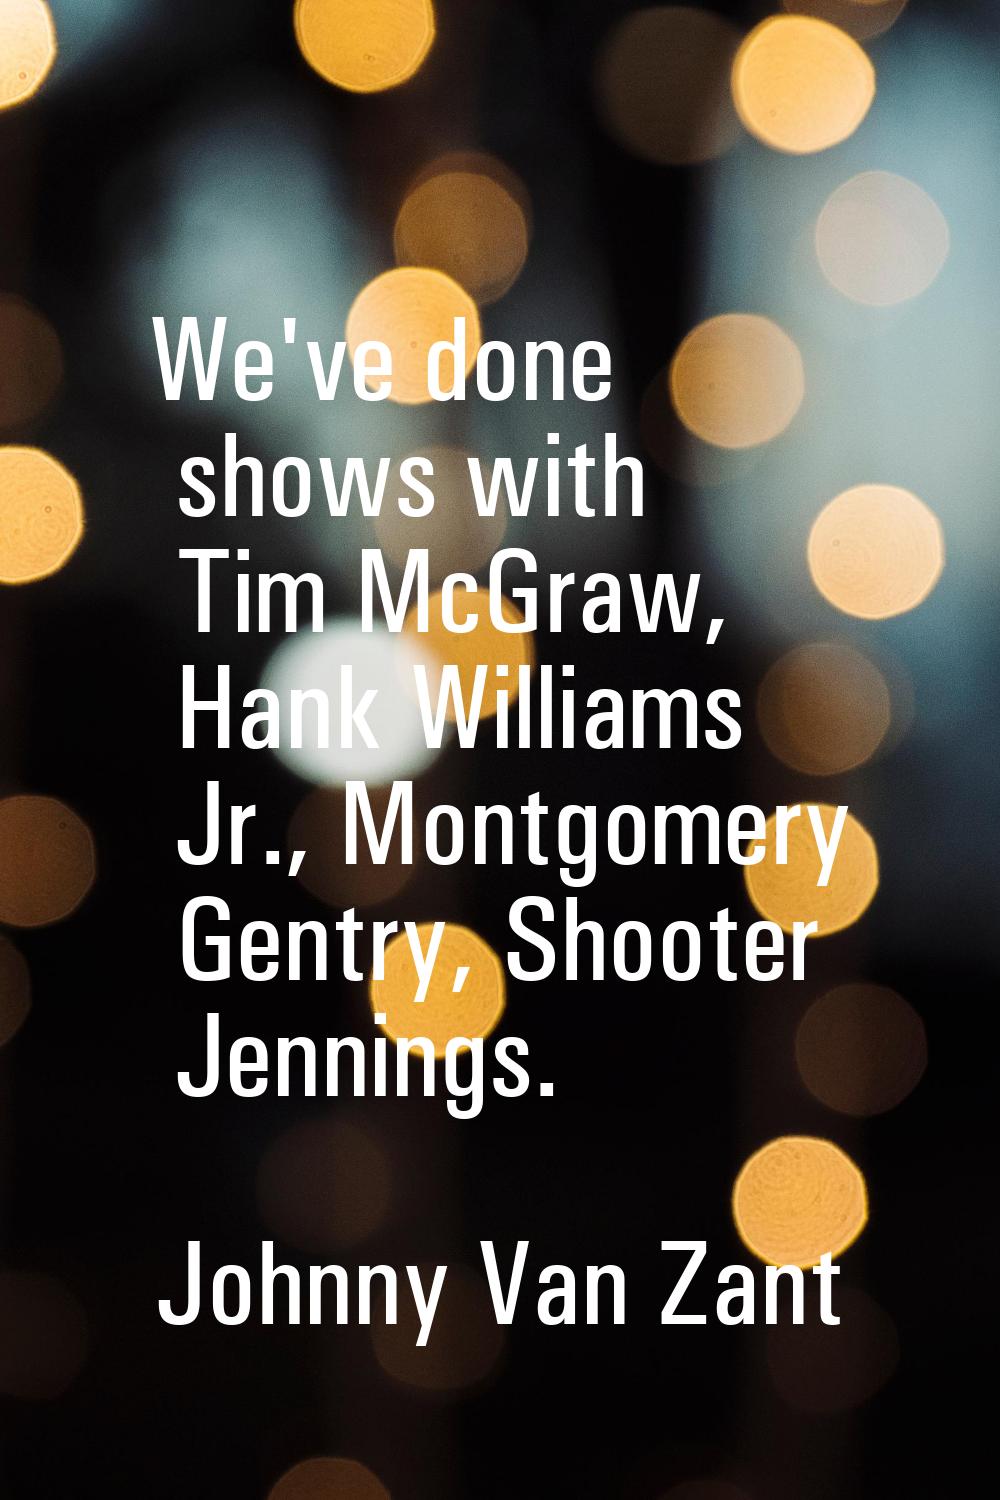 We've done shows with Tim McGraw, Hank Williams Jr., Montgomery Gentry, Shooter Jennings.